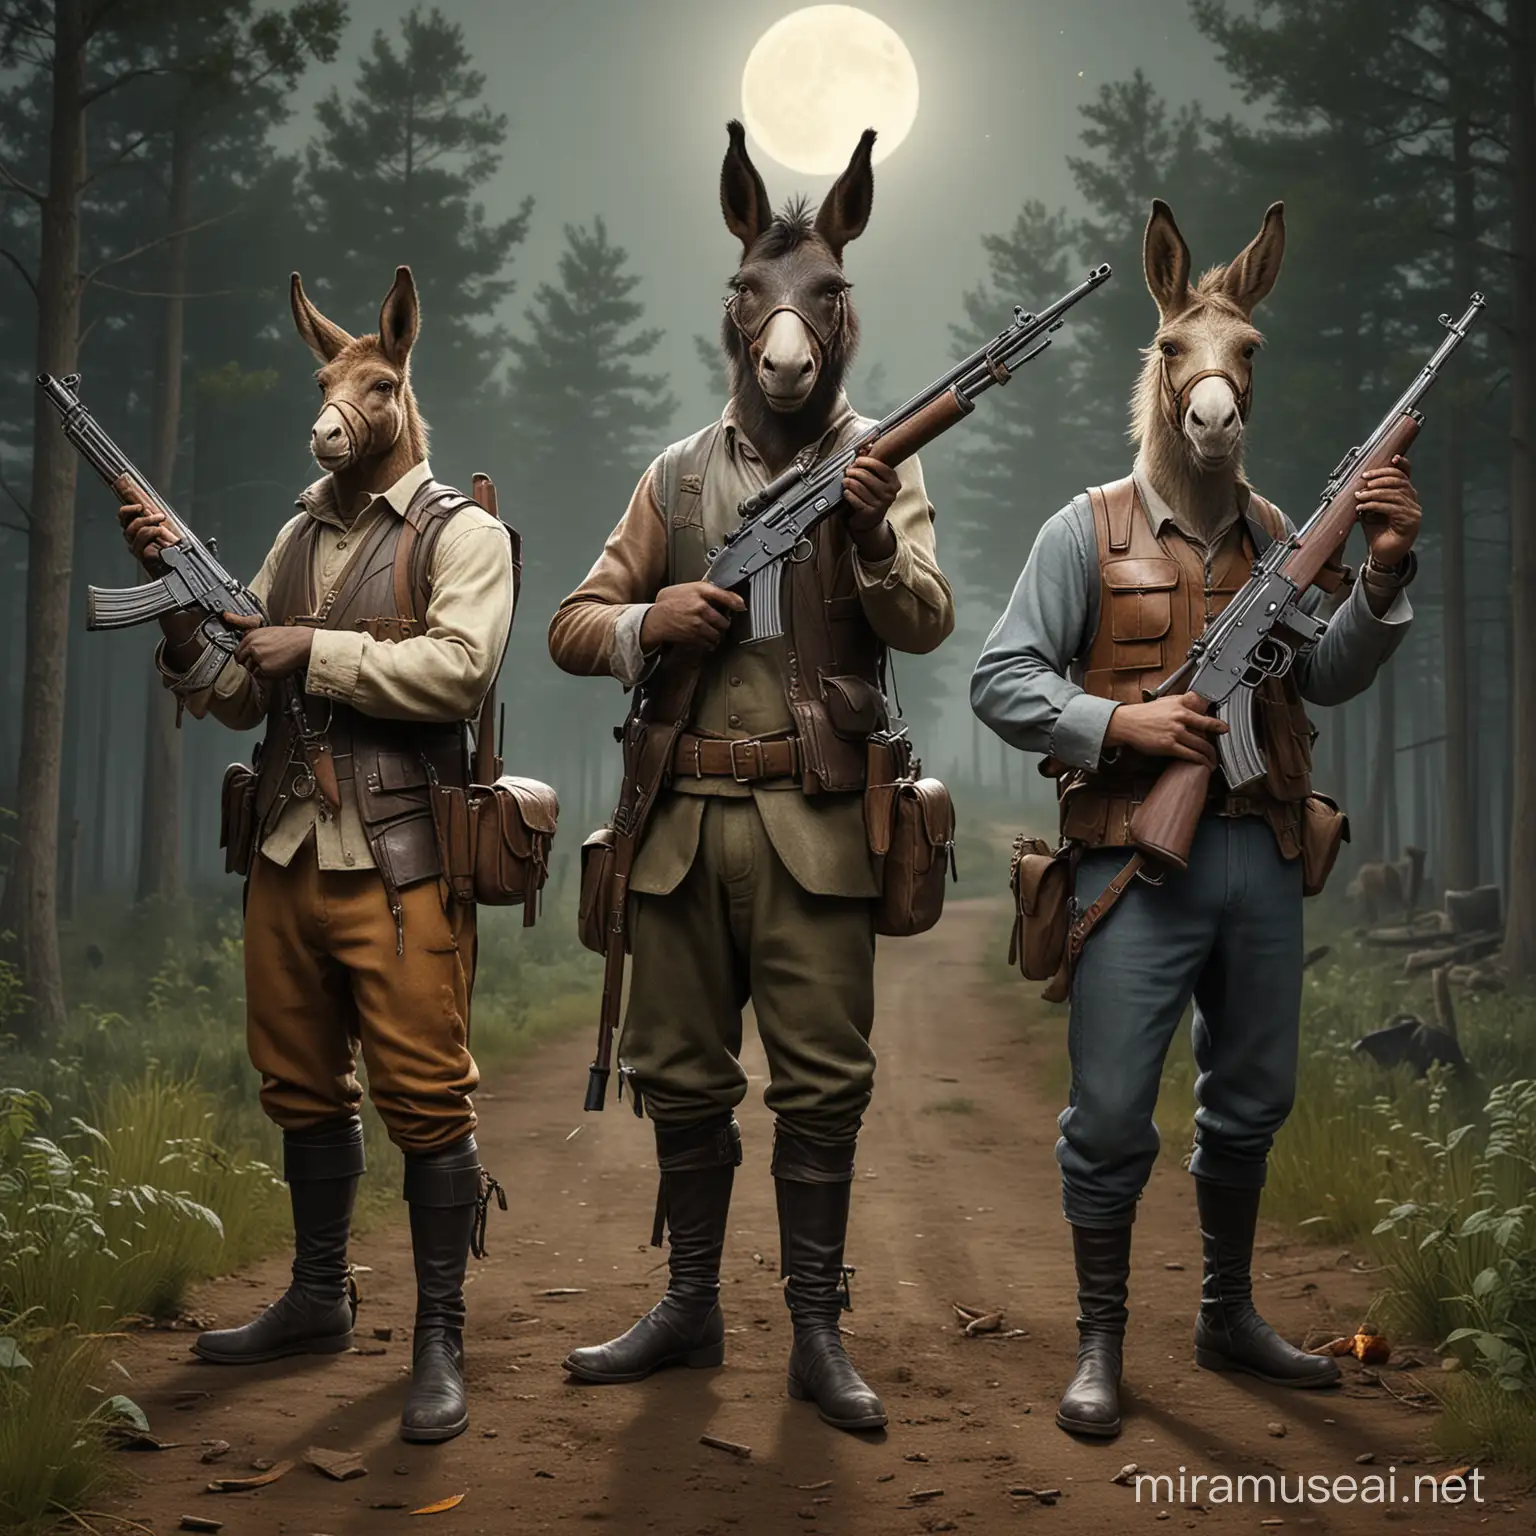 Forest Clearing Standoff Bremen Town Musicians Armed with Guns under Full Moon